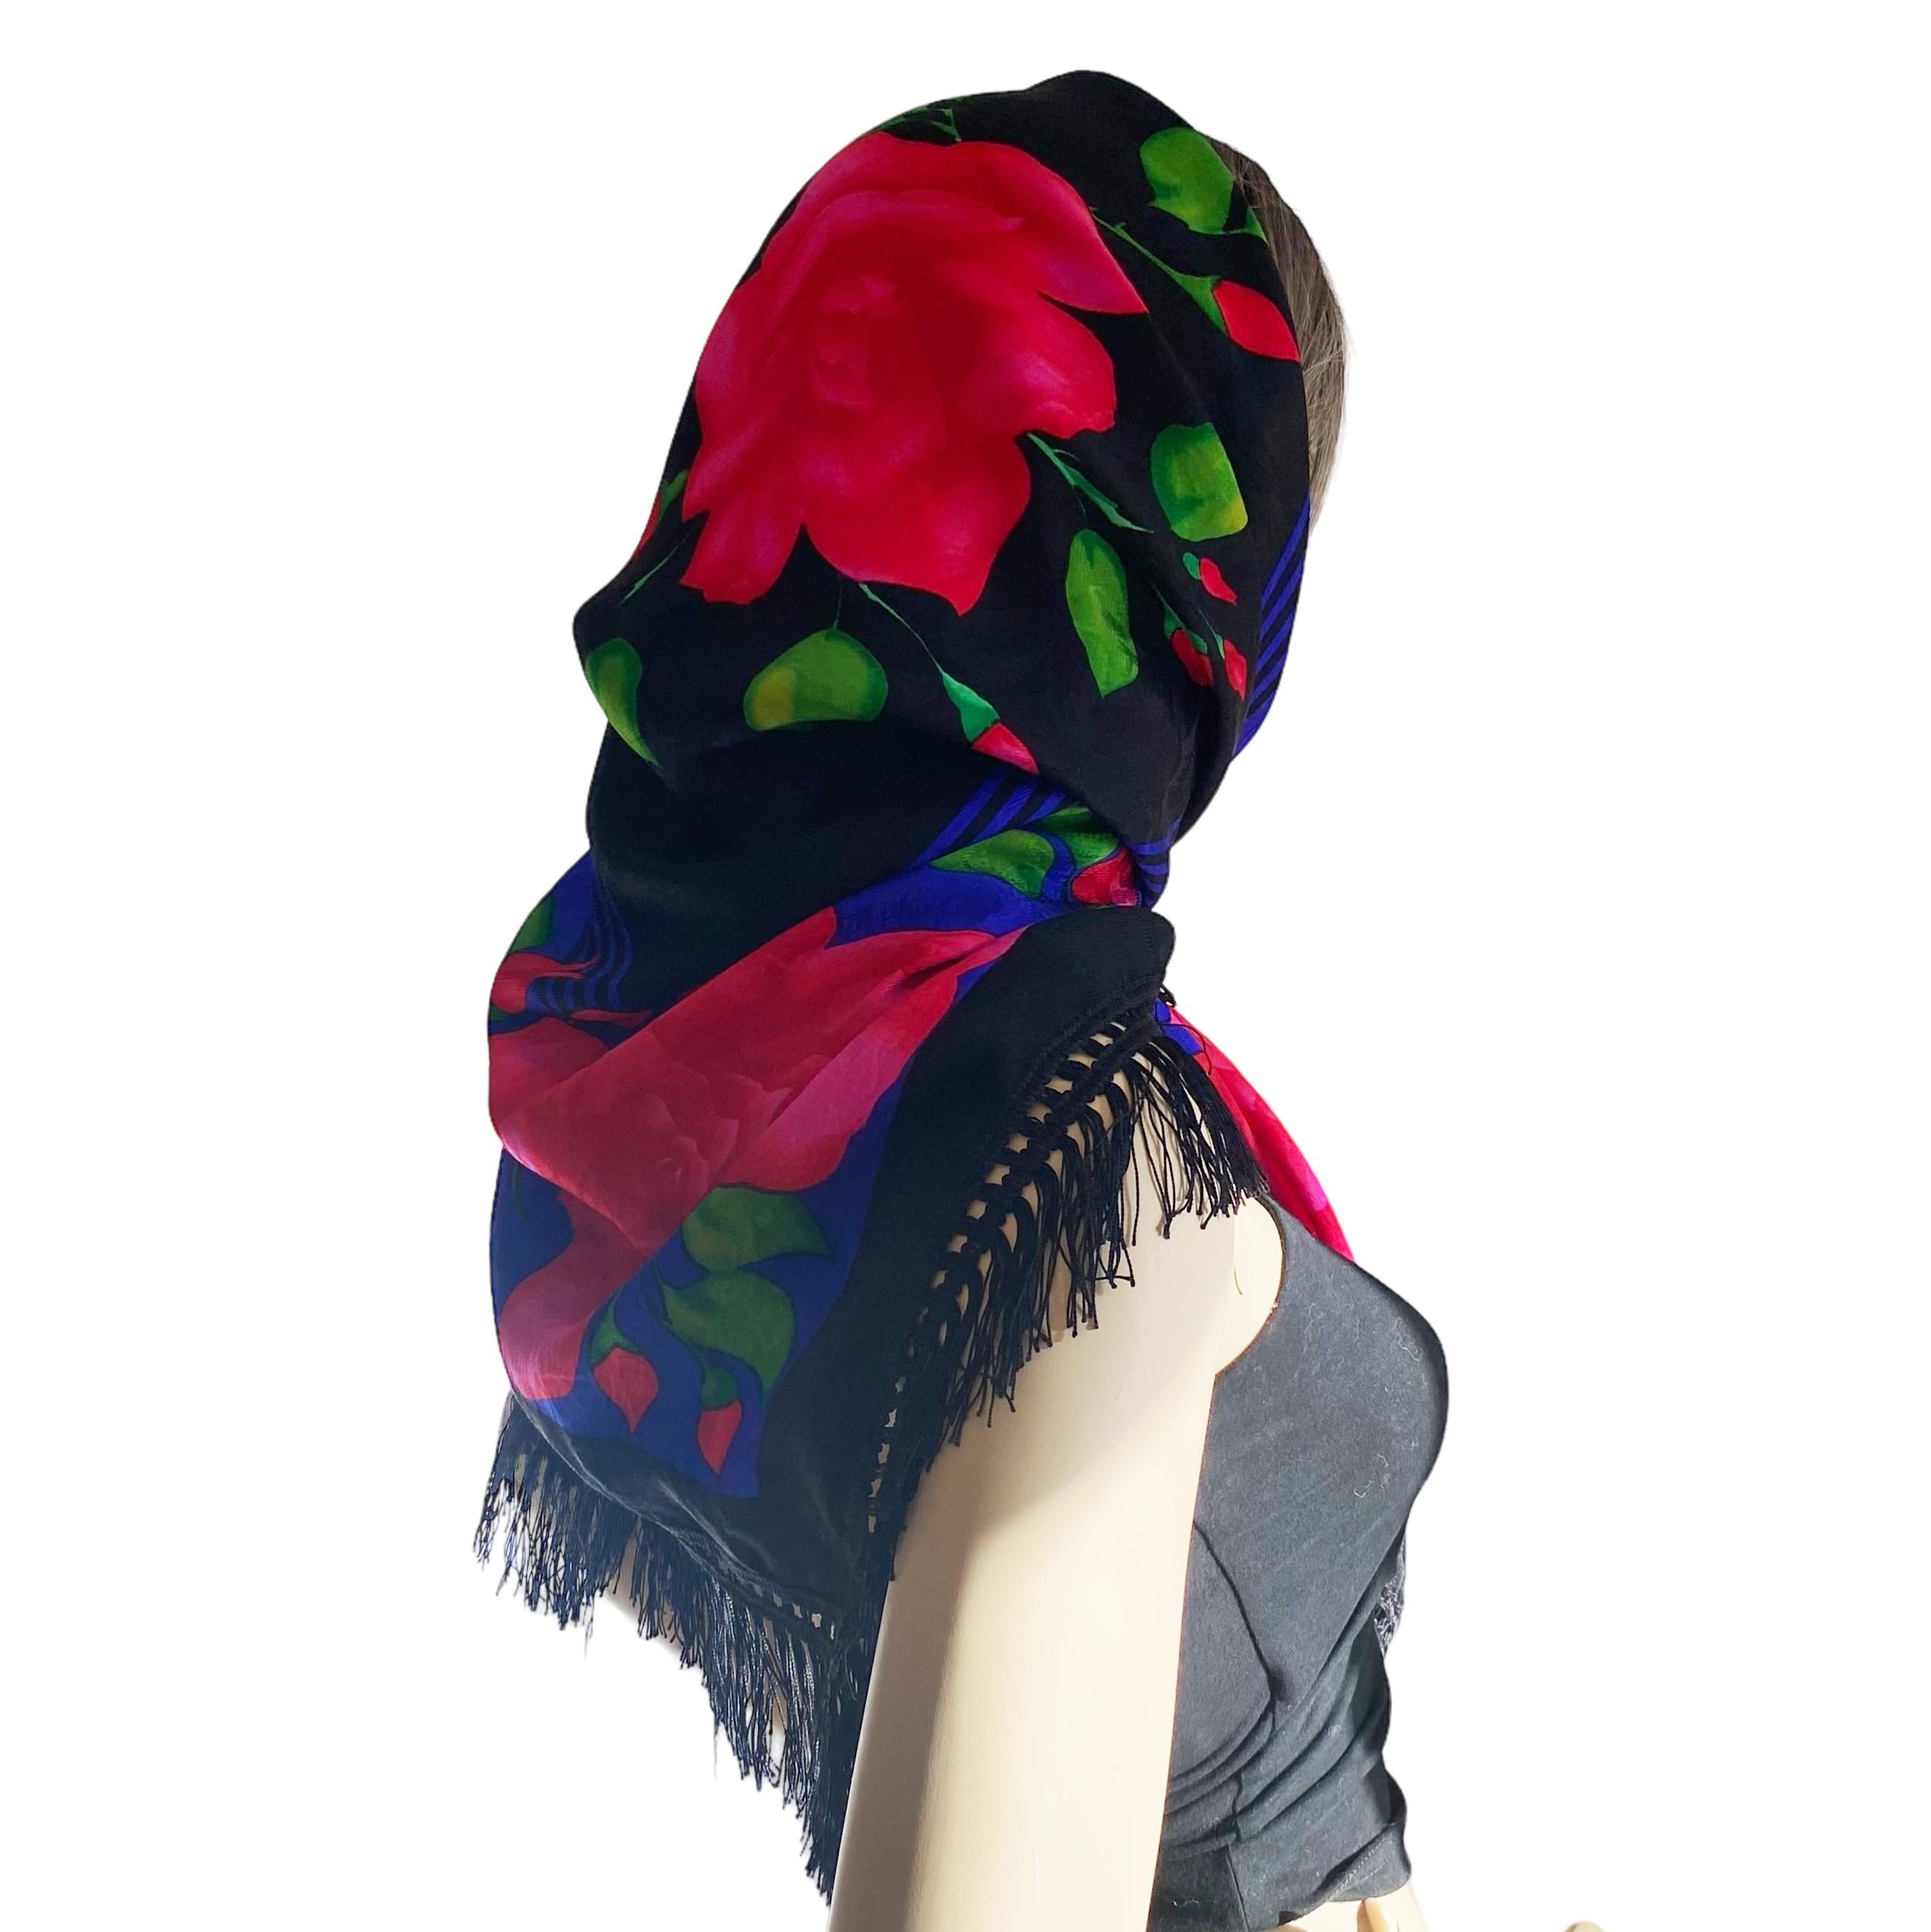 VINTAGE FLORA KUNG SILK SHAWL SCARF
Circa: 1986
Material: FLORA KUNG exclusive weaved 100% Silk Jacquard. 
Copyright Pattern: Climbing Roses, Black 
Condition: NEW
Size: 38” x 38